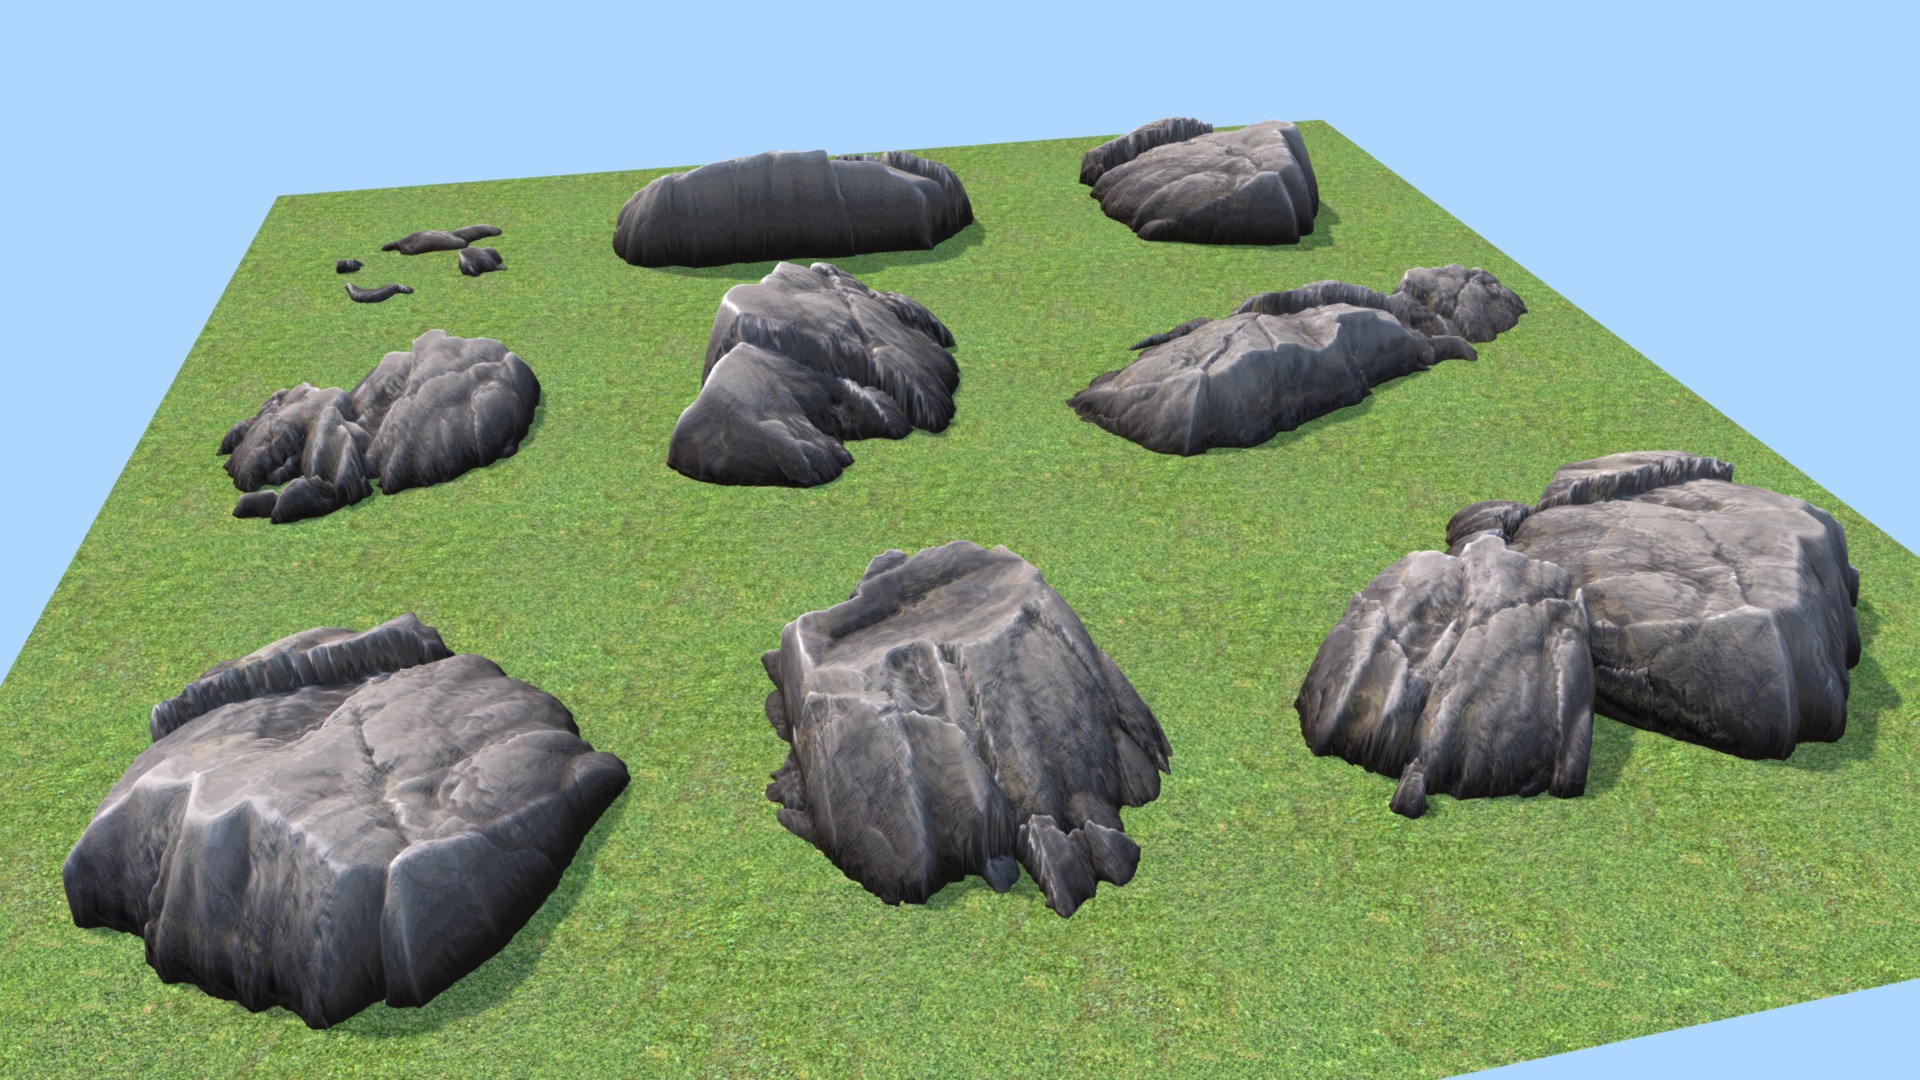 3D model Mountain Rock Pack - This is a 3D model of the Mountain Rock Pack. The 3D model is about a group of turtles on grass.